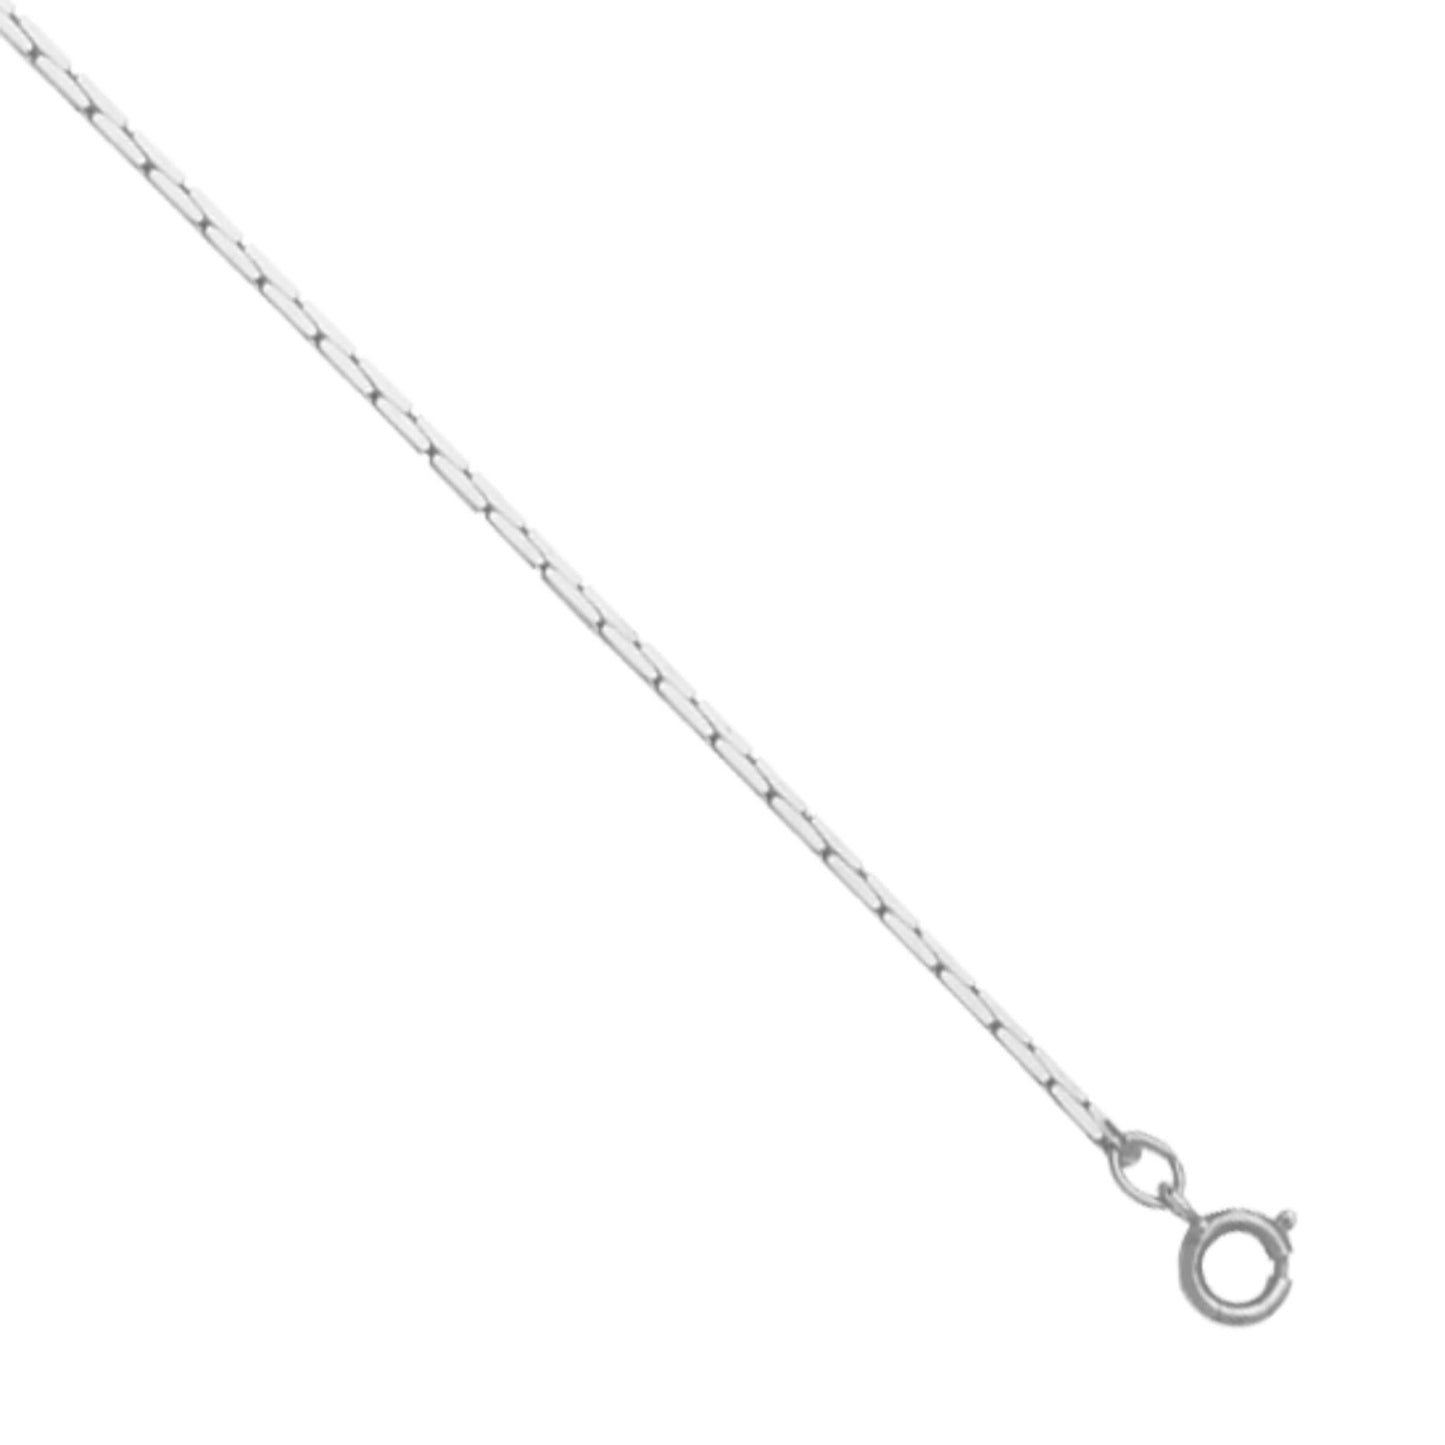 A box link bracelet displayed on a neutral white background.